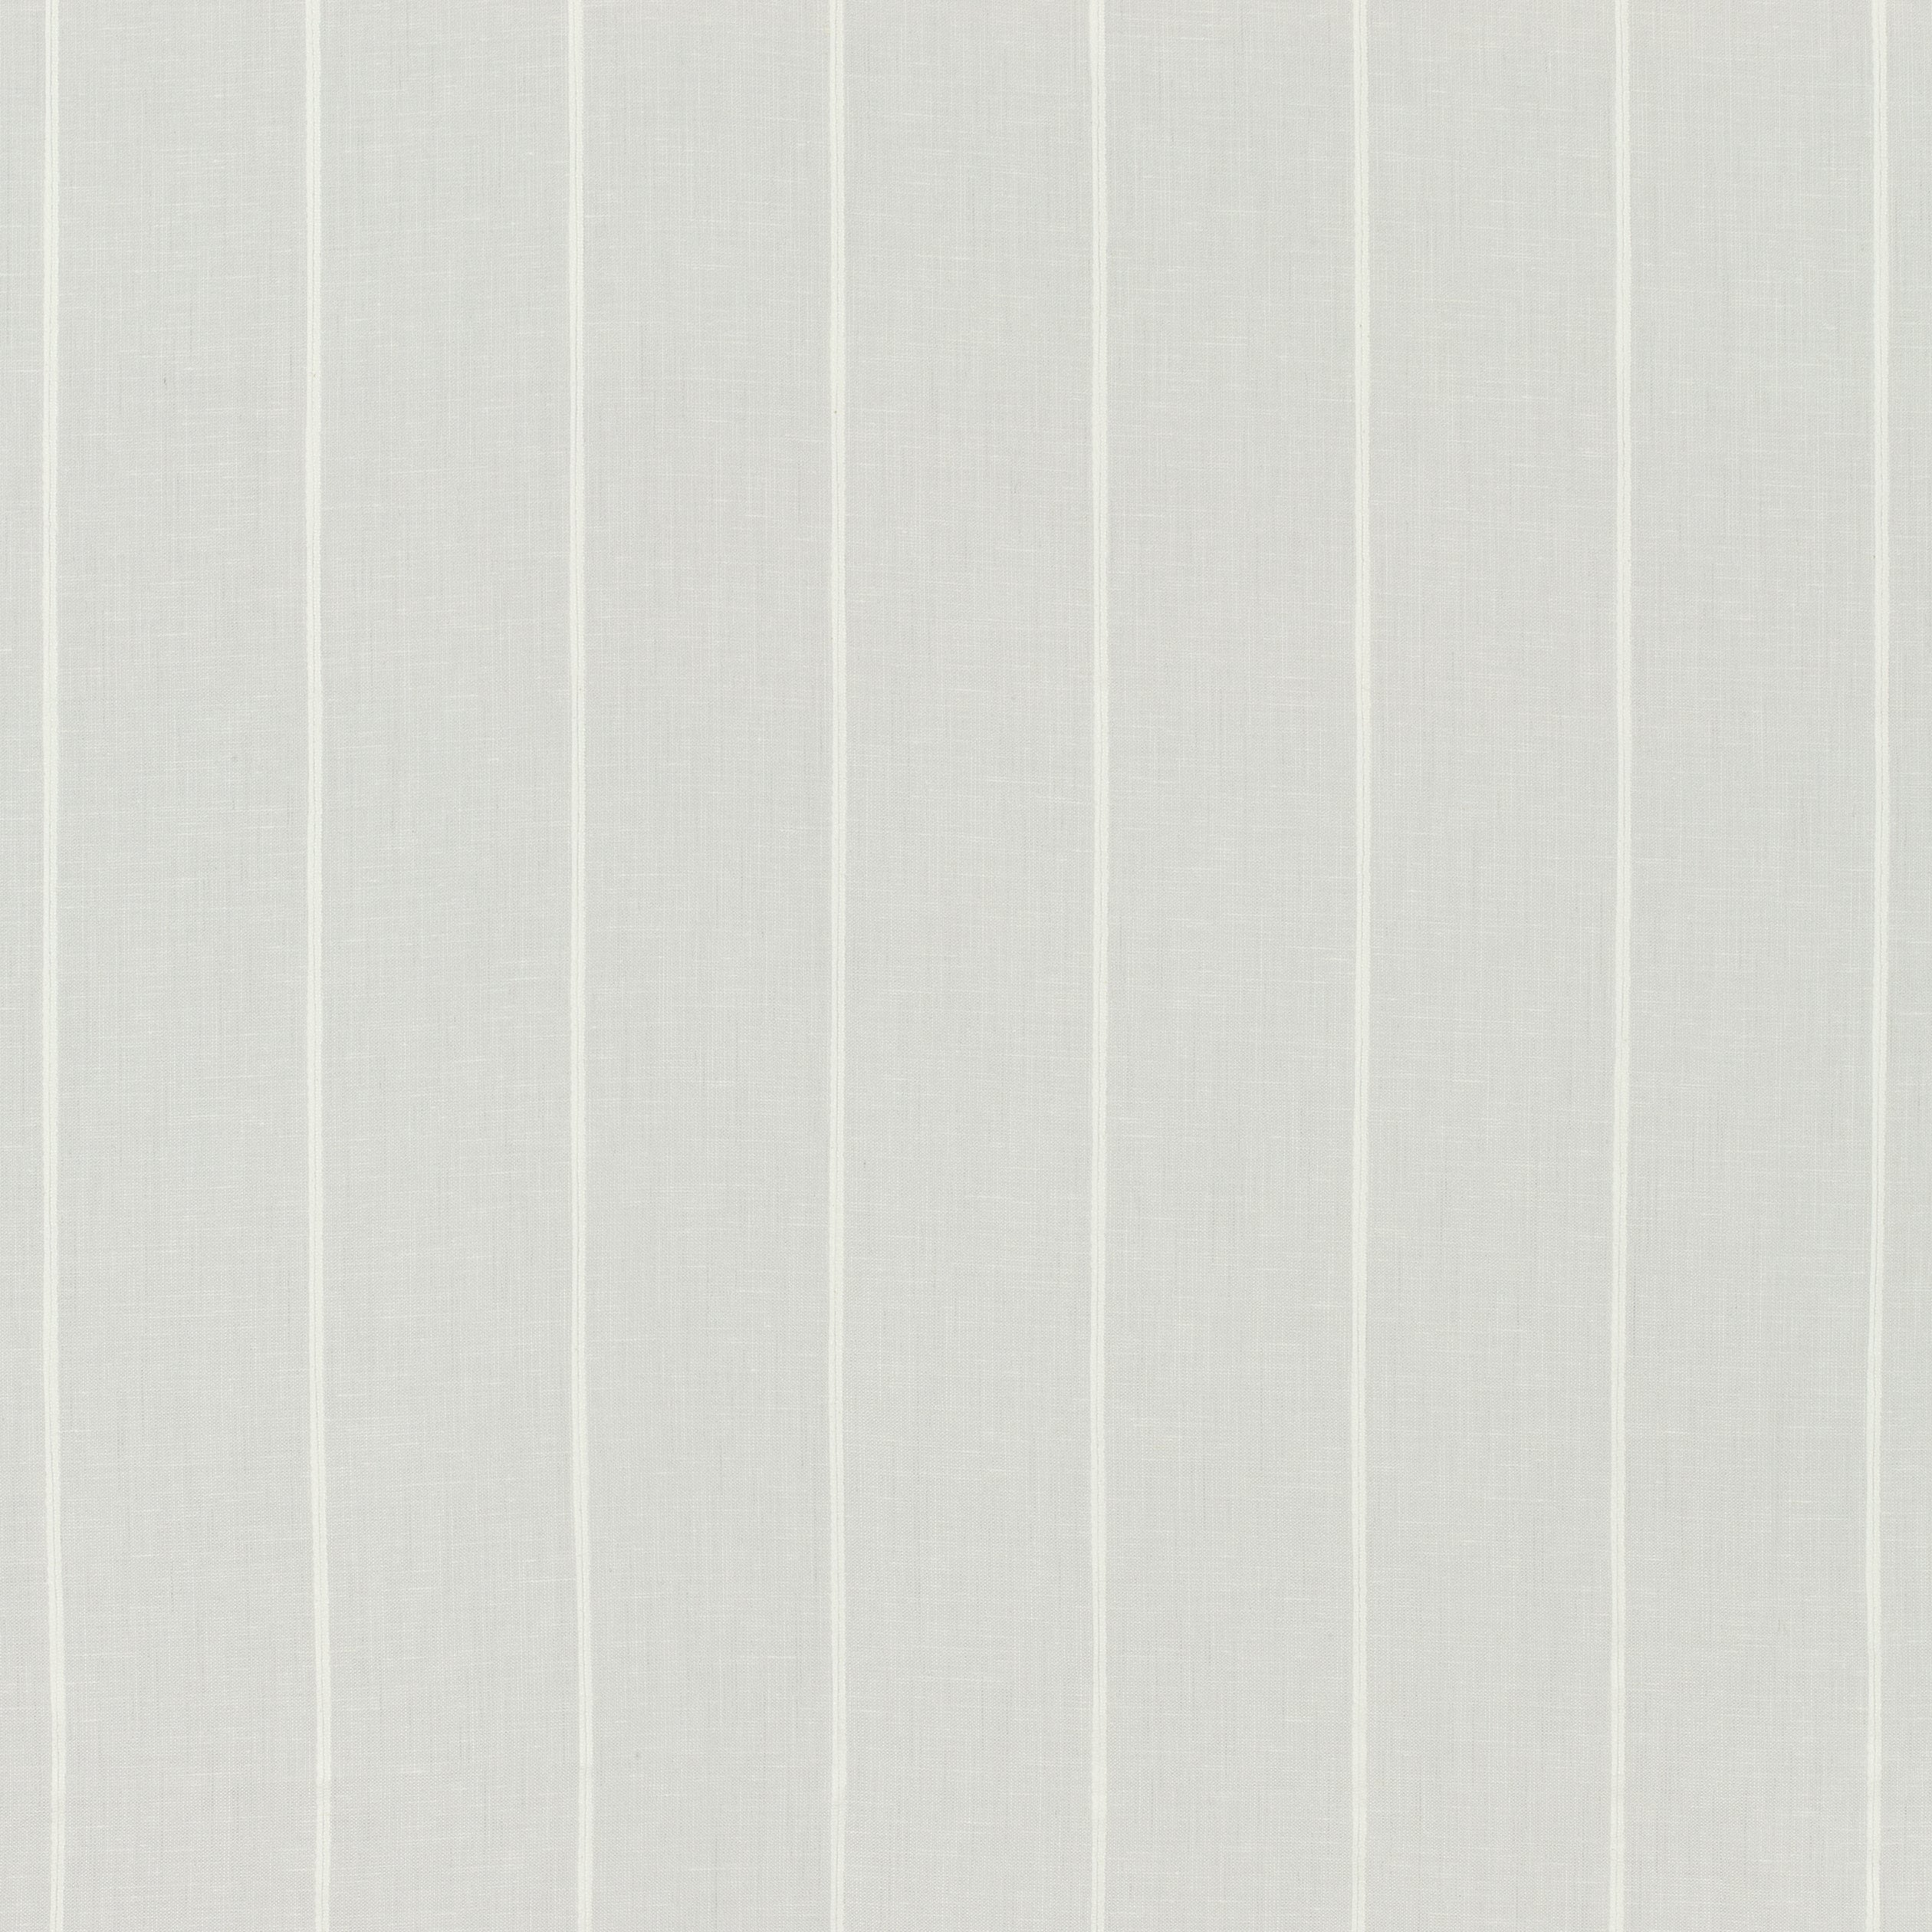 Berkshire Stripe fabric in ivory color - pattern number FWW7161 - by Thibaut in the Atmosphere collection